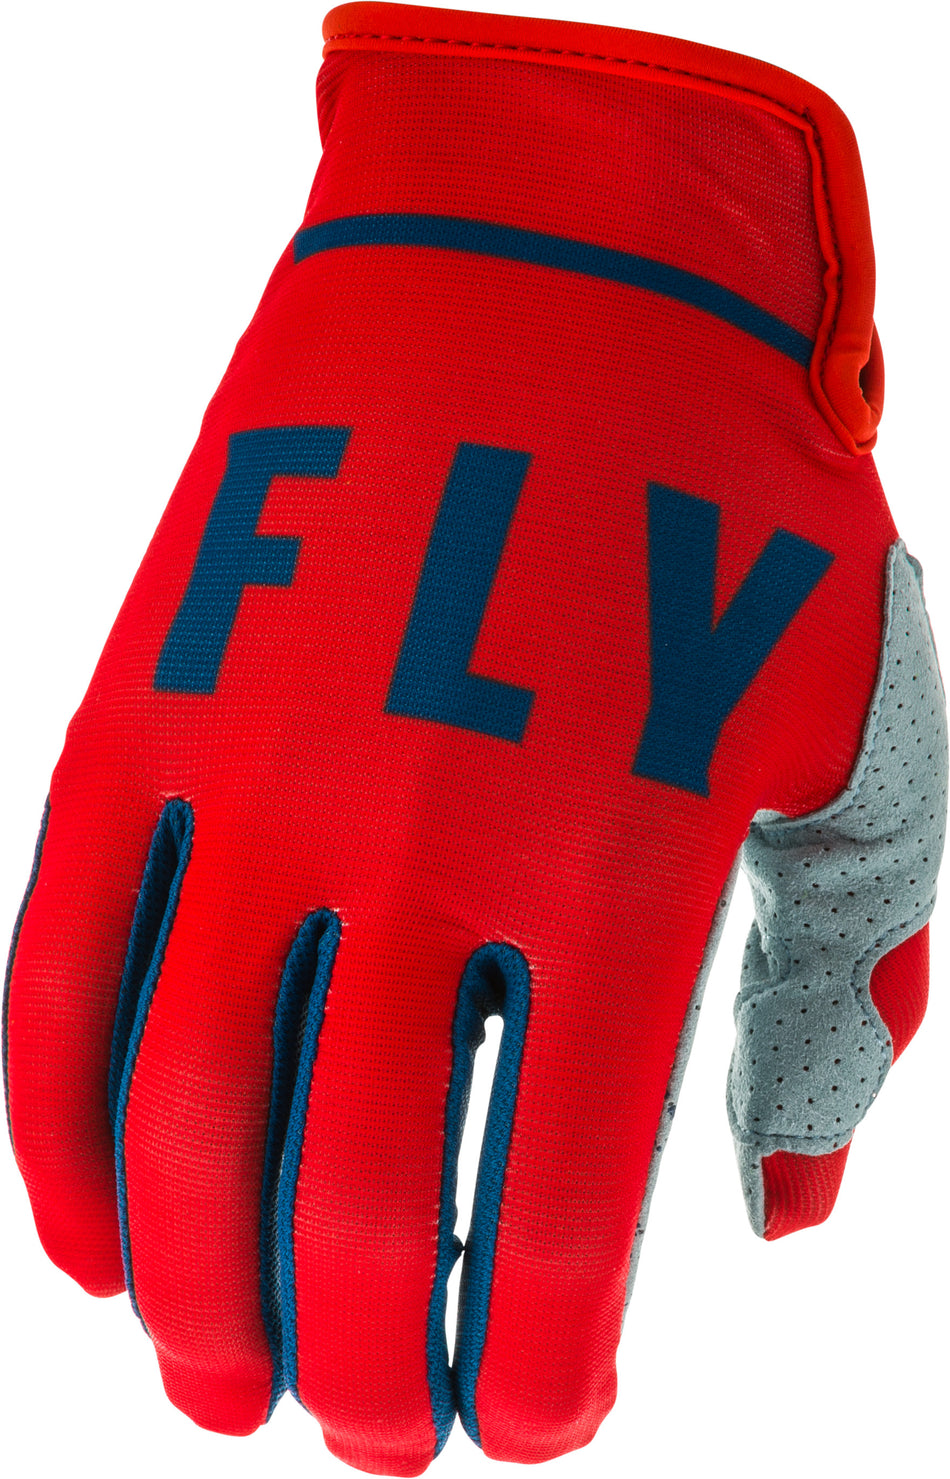 FLY RACING Lite Gloves Red/Slate/Navy Sz 12 373-71212